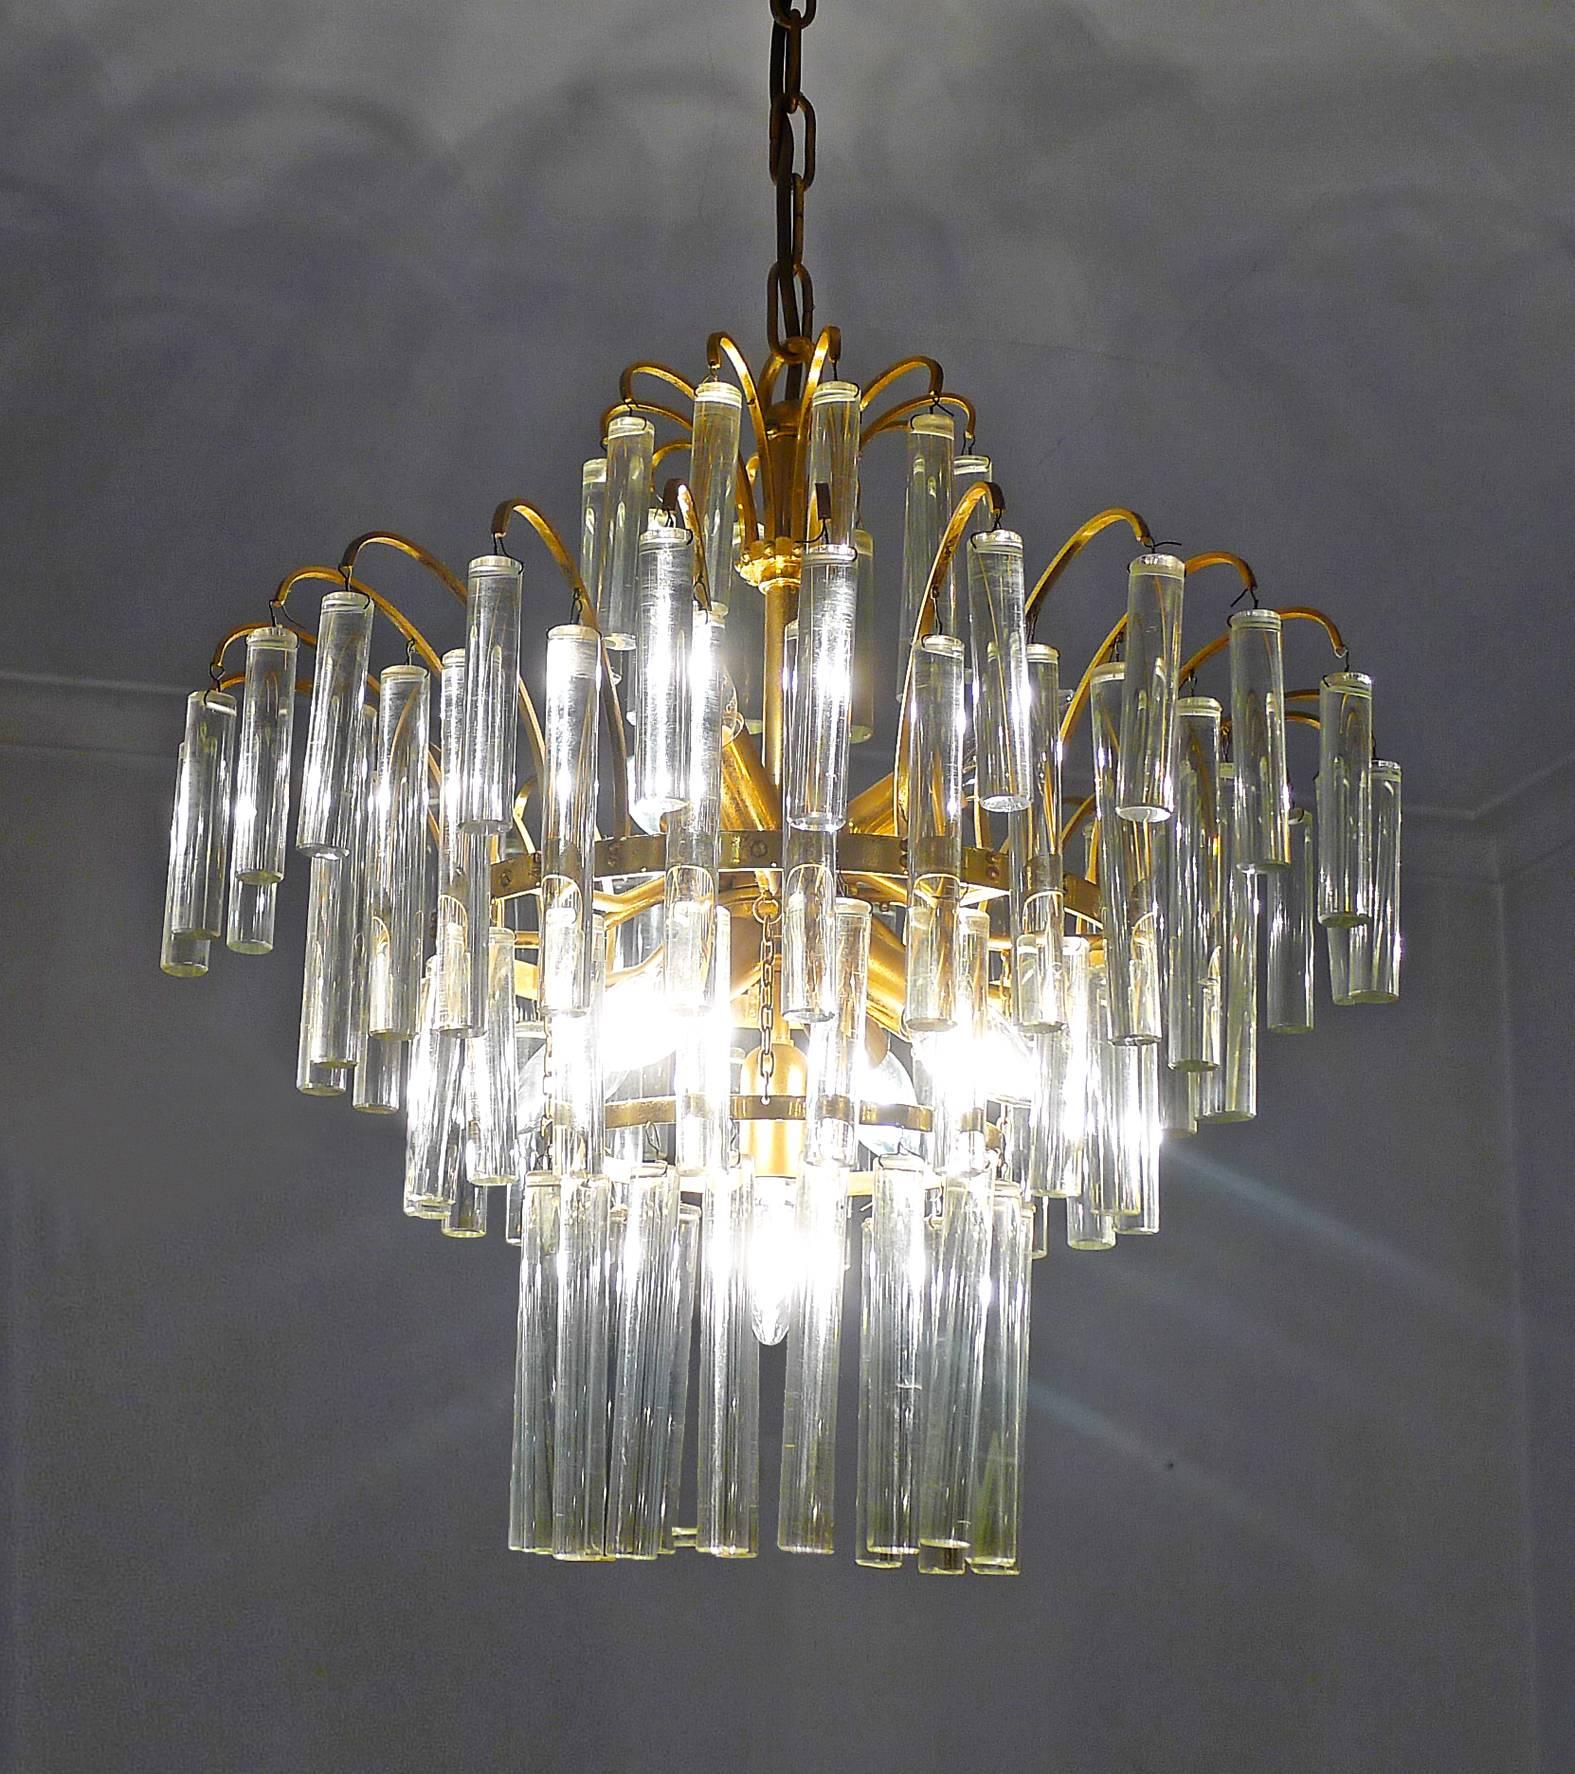 Italian Large Venini Camer Midcentury Gilt Brass 94 Crystal Rods Waterfall Chandelier For Sale